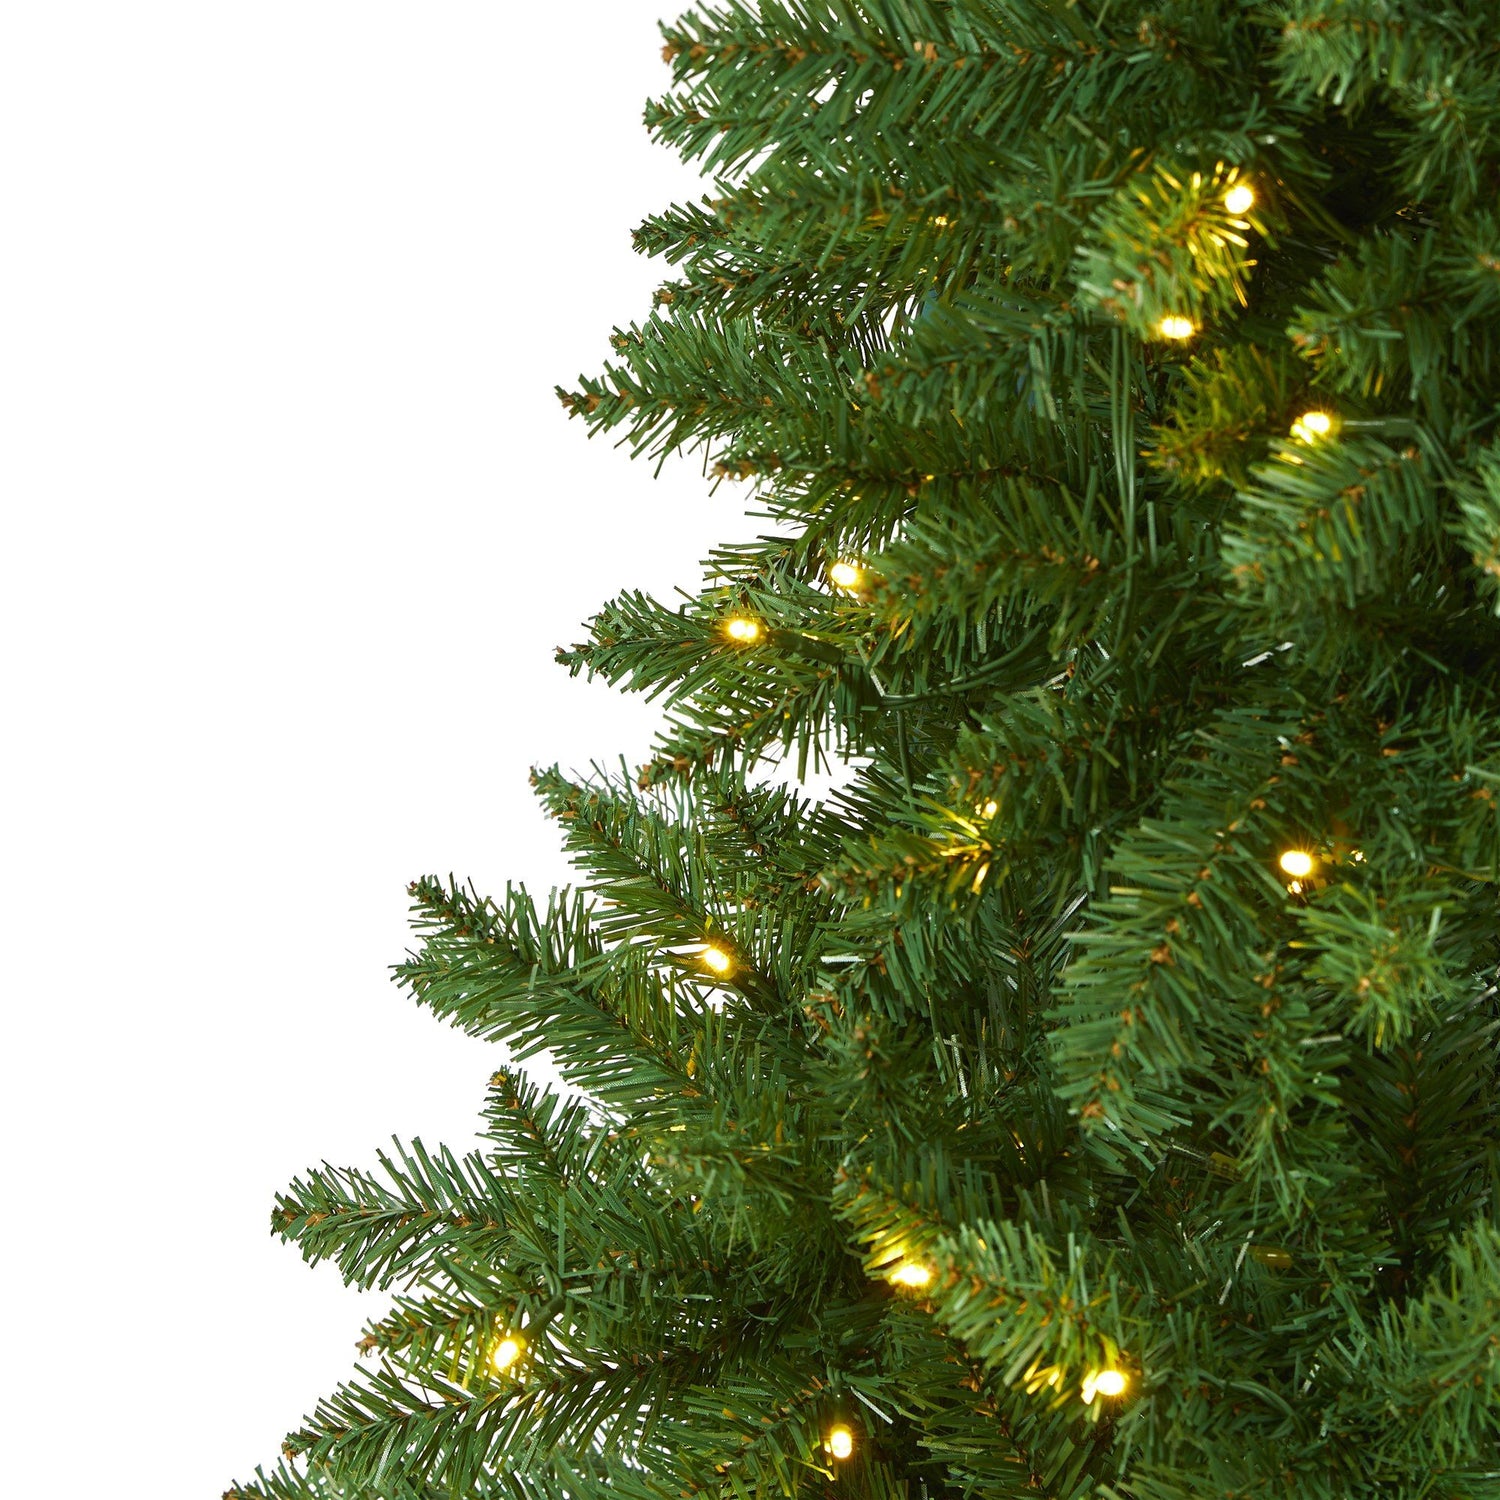 6’ Slim Green Mountain Pine Artificial Christmas Tree with 250 Clear LED Lights